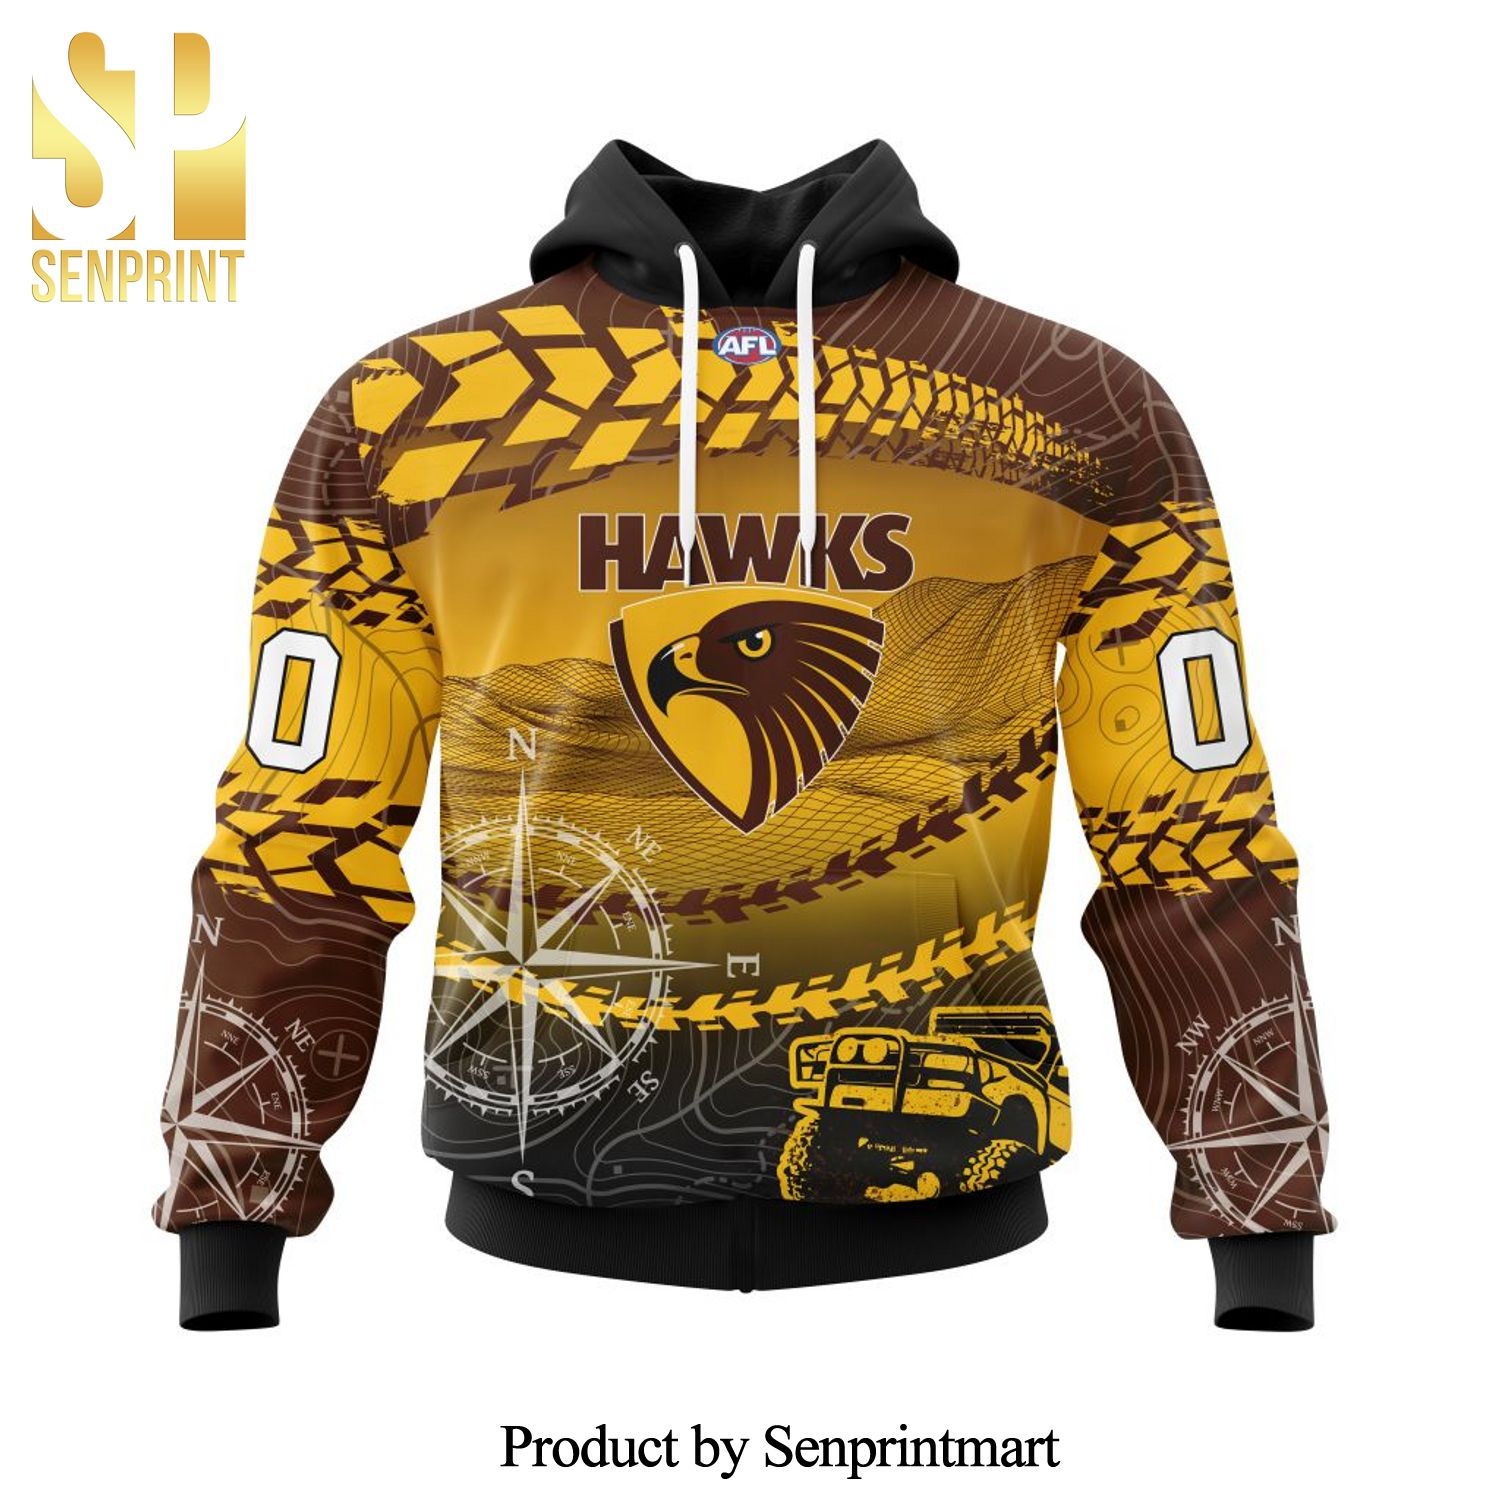 AFL Hawthorn Football Club Version Off-Road All Over Printed Shirt